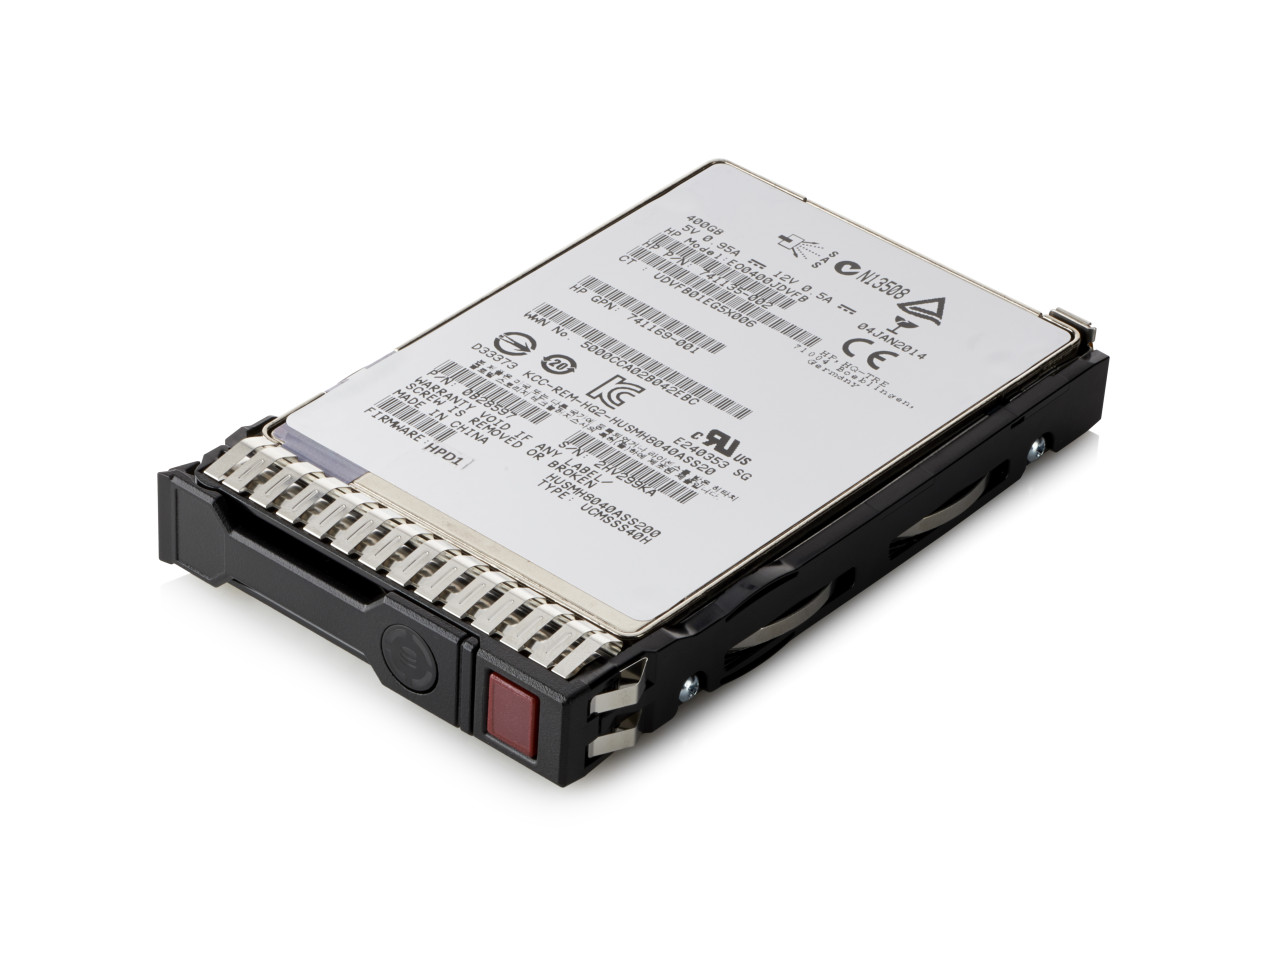 P05924-B21 - HPE 240GB SATA 6G Read Intensive SFF (2.5in) SC 3yr Wty Digitally Signed Firmware SSD